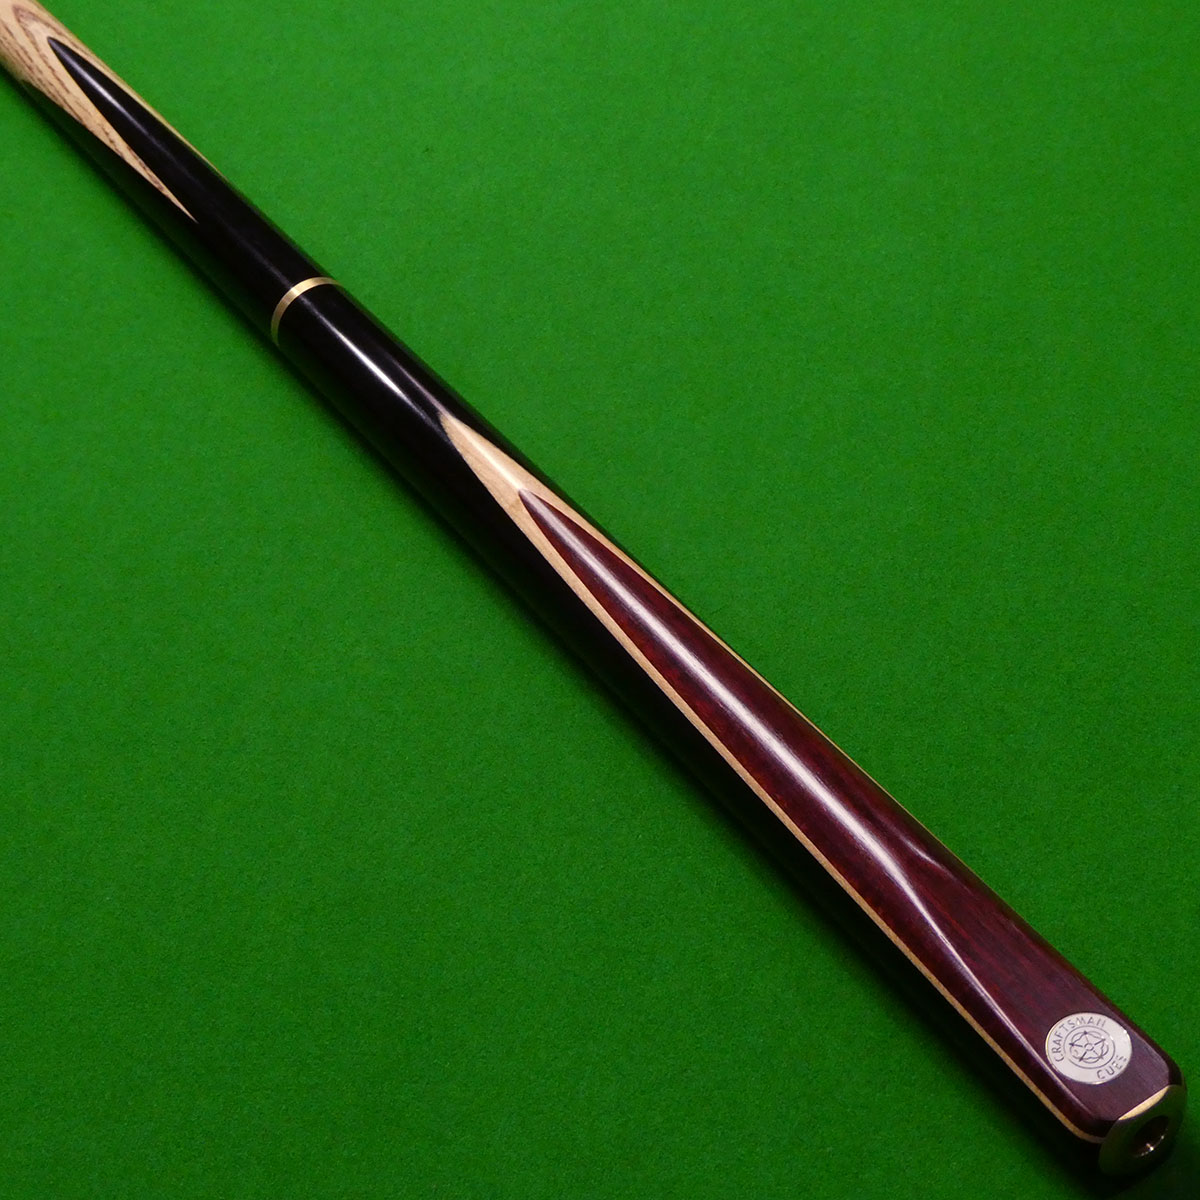 FITS ALL MASTER CUES MASTER CUE 6" EBONY MINI BUTT EXTENSION FOR SNOOKER CUES 